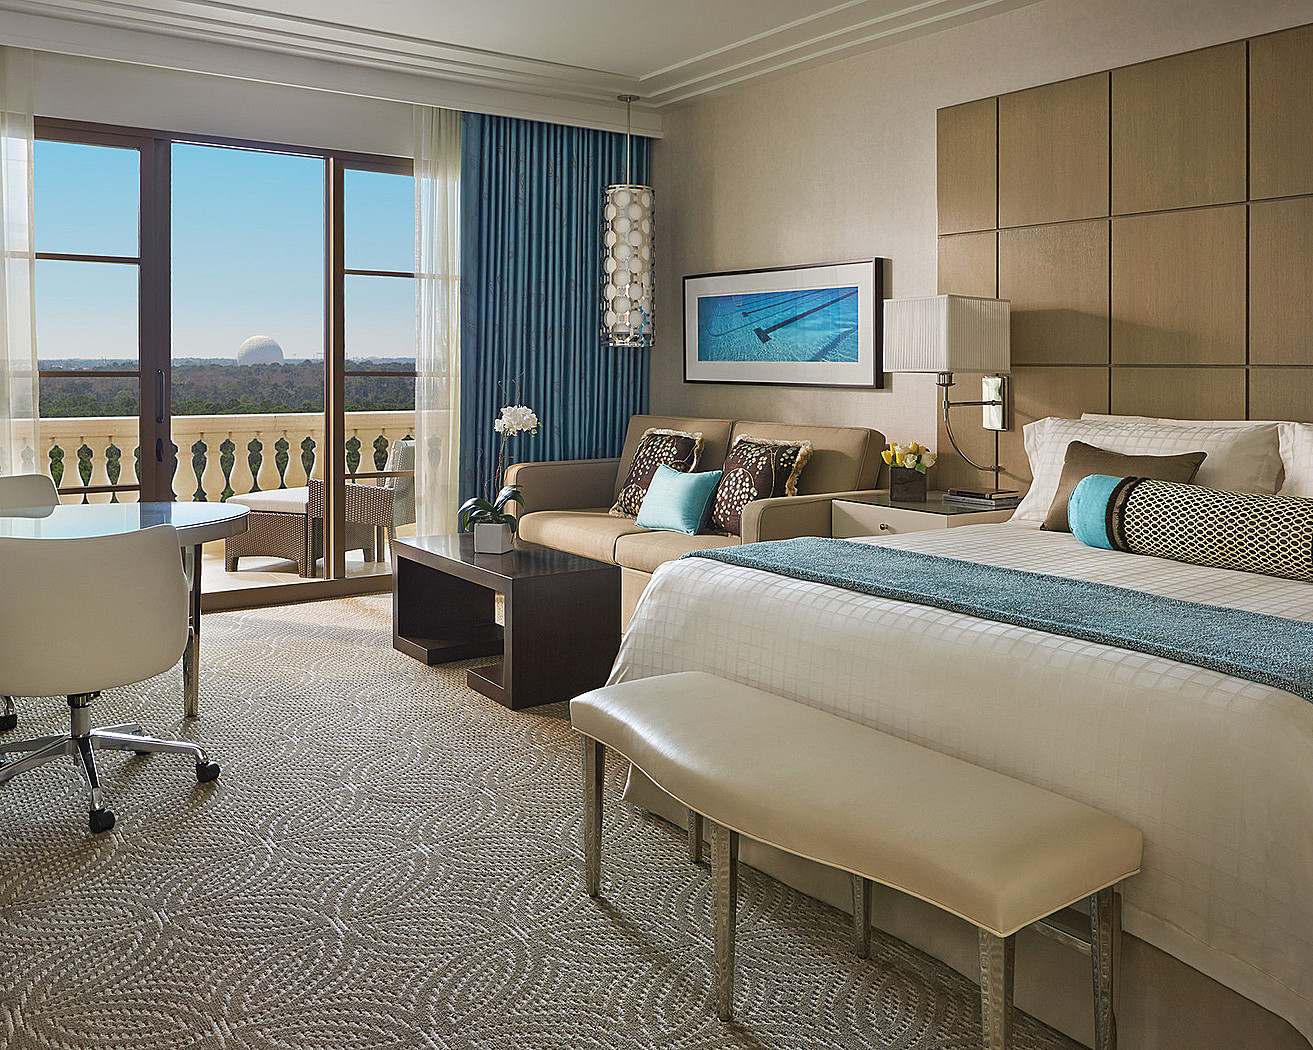 Enter for a chance to win a FREE 3 Night stay at the new Four Seasons at Walt Disney World